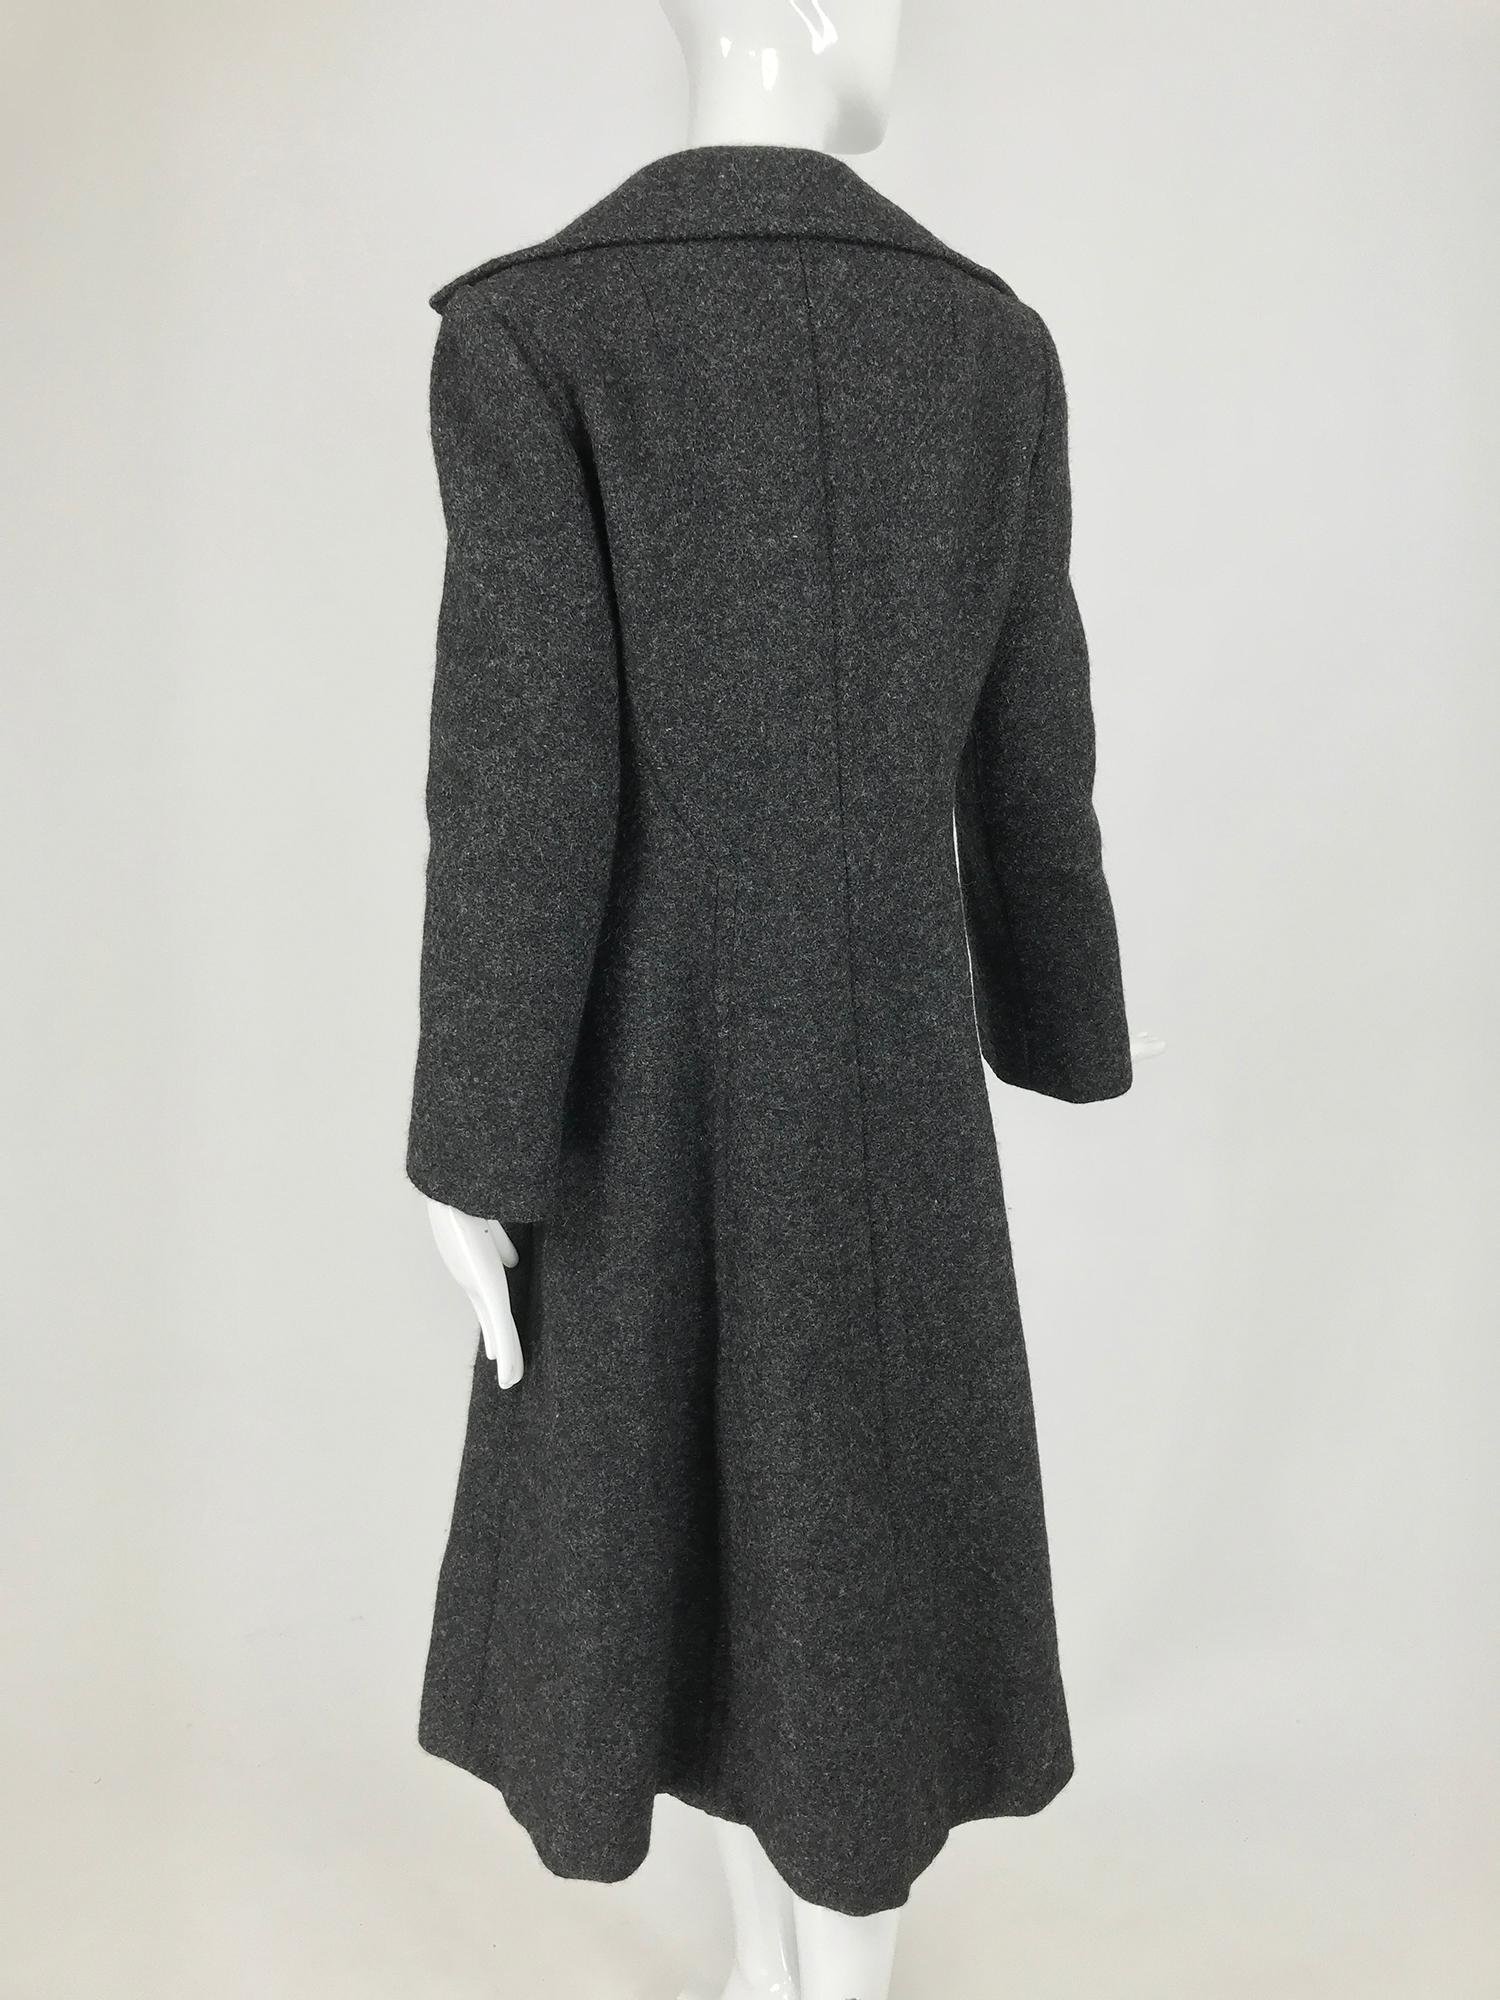 Pauline Trigere Grey Flecked Wool Princess Coat 1950s In Good Condition For Sale In West Palm Beach, FL